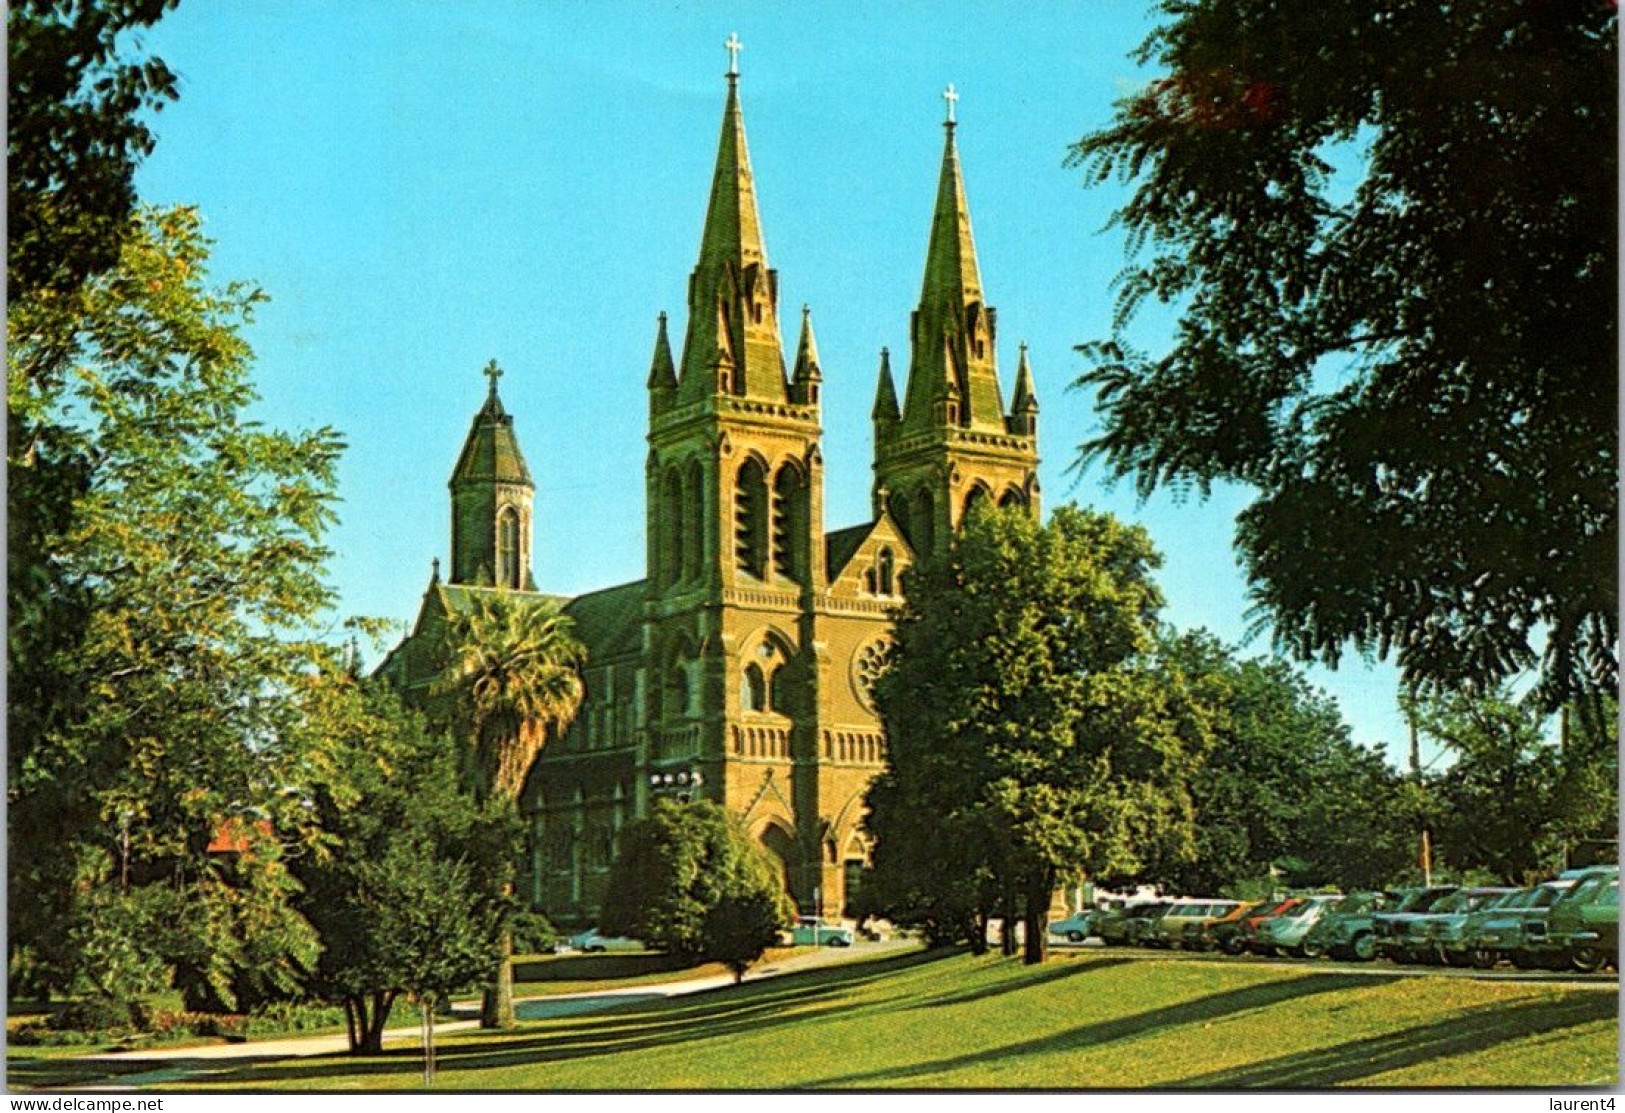 17-7-2023 (2 S 30) Australia (posted In 1978 With Bird Stamp) St Peter's Cathedral In Adelaide - Adelaide